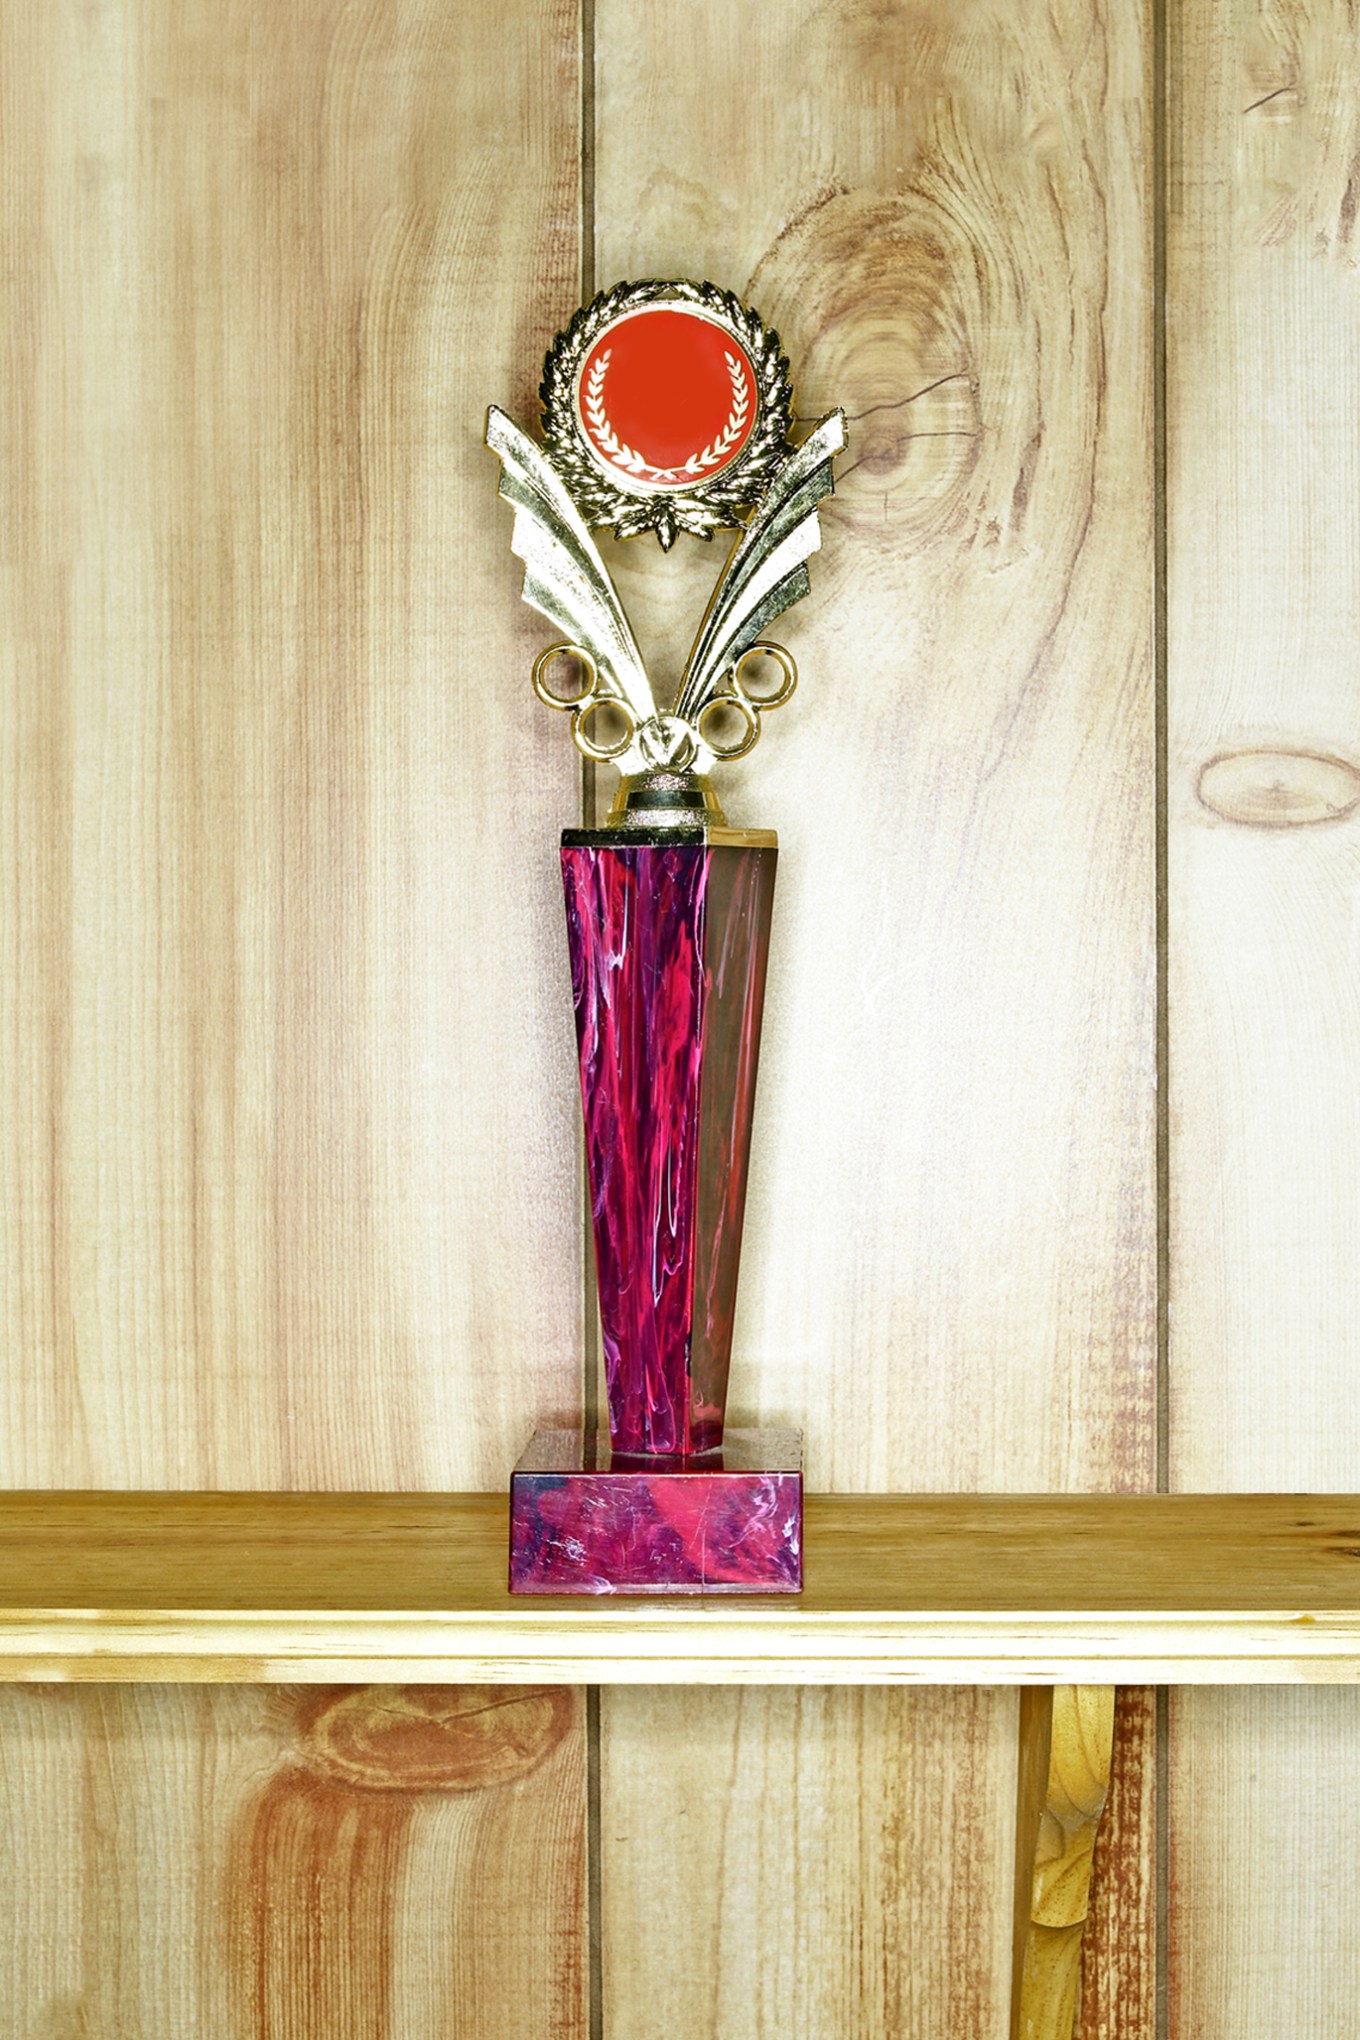 Red and gold trophy on shelf against wood-paneled wall